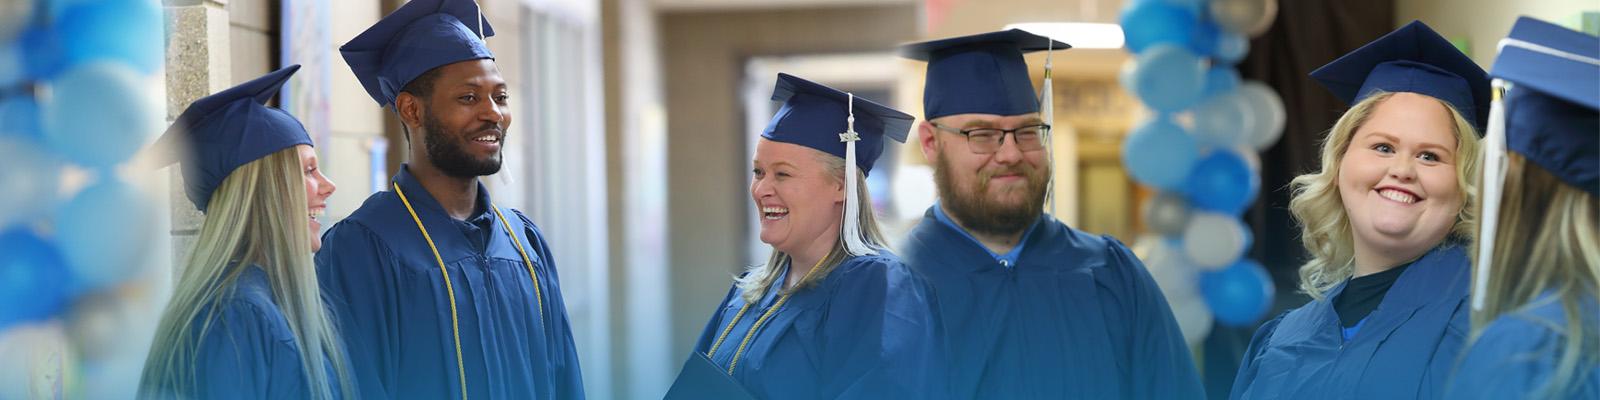 graduates smiling in hallway with blue toned balloons